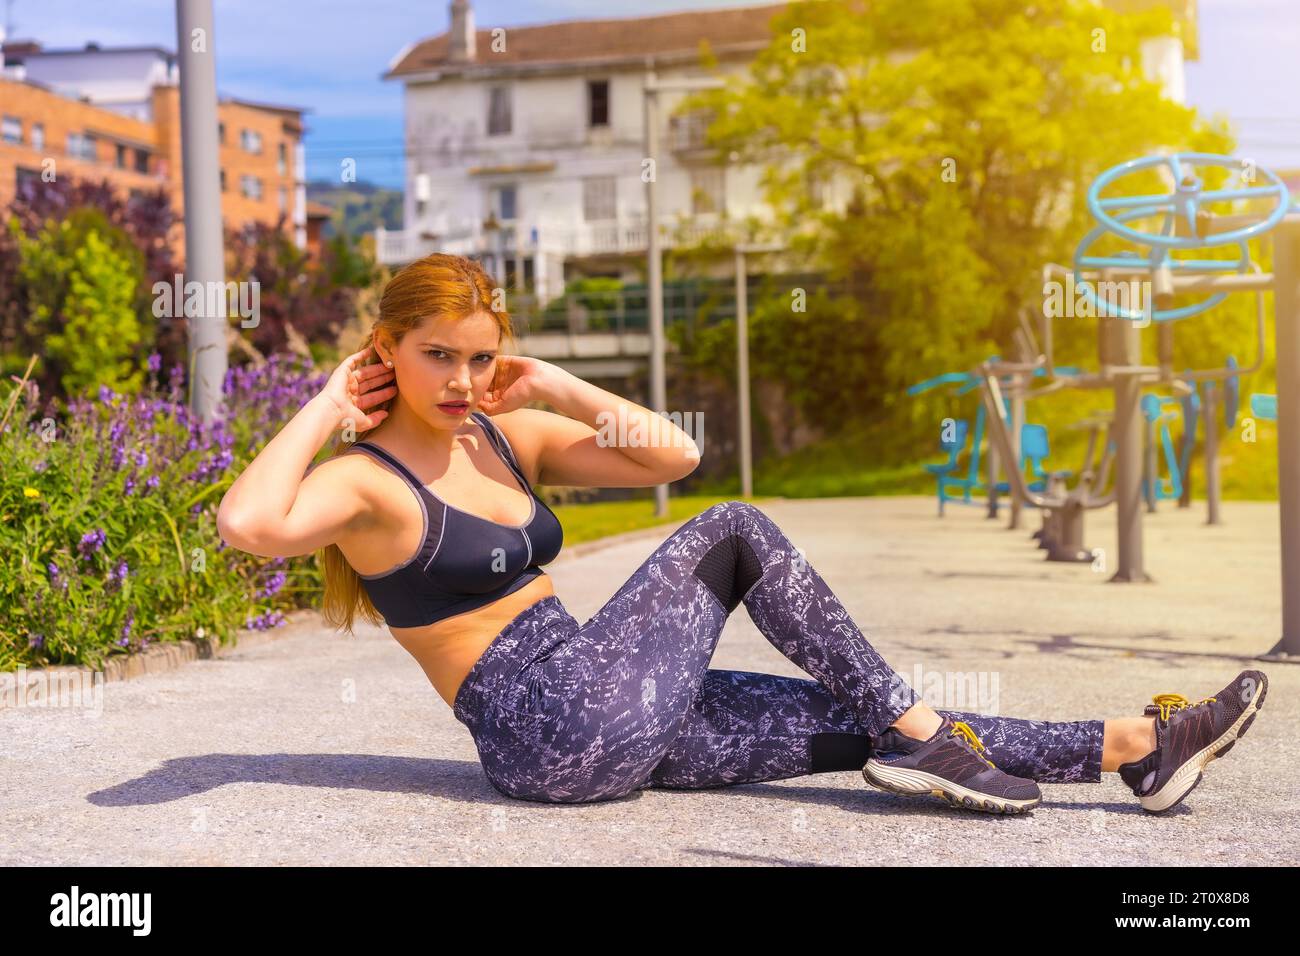 Red-haired woman with purple leggings and black overalls exercising on the machines, doing sit-ups, sport in the city Stock Photo